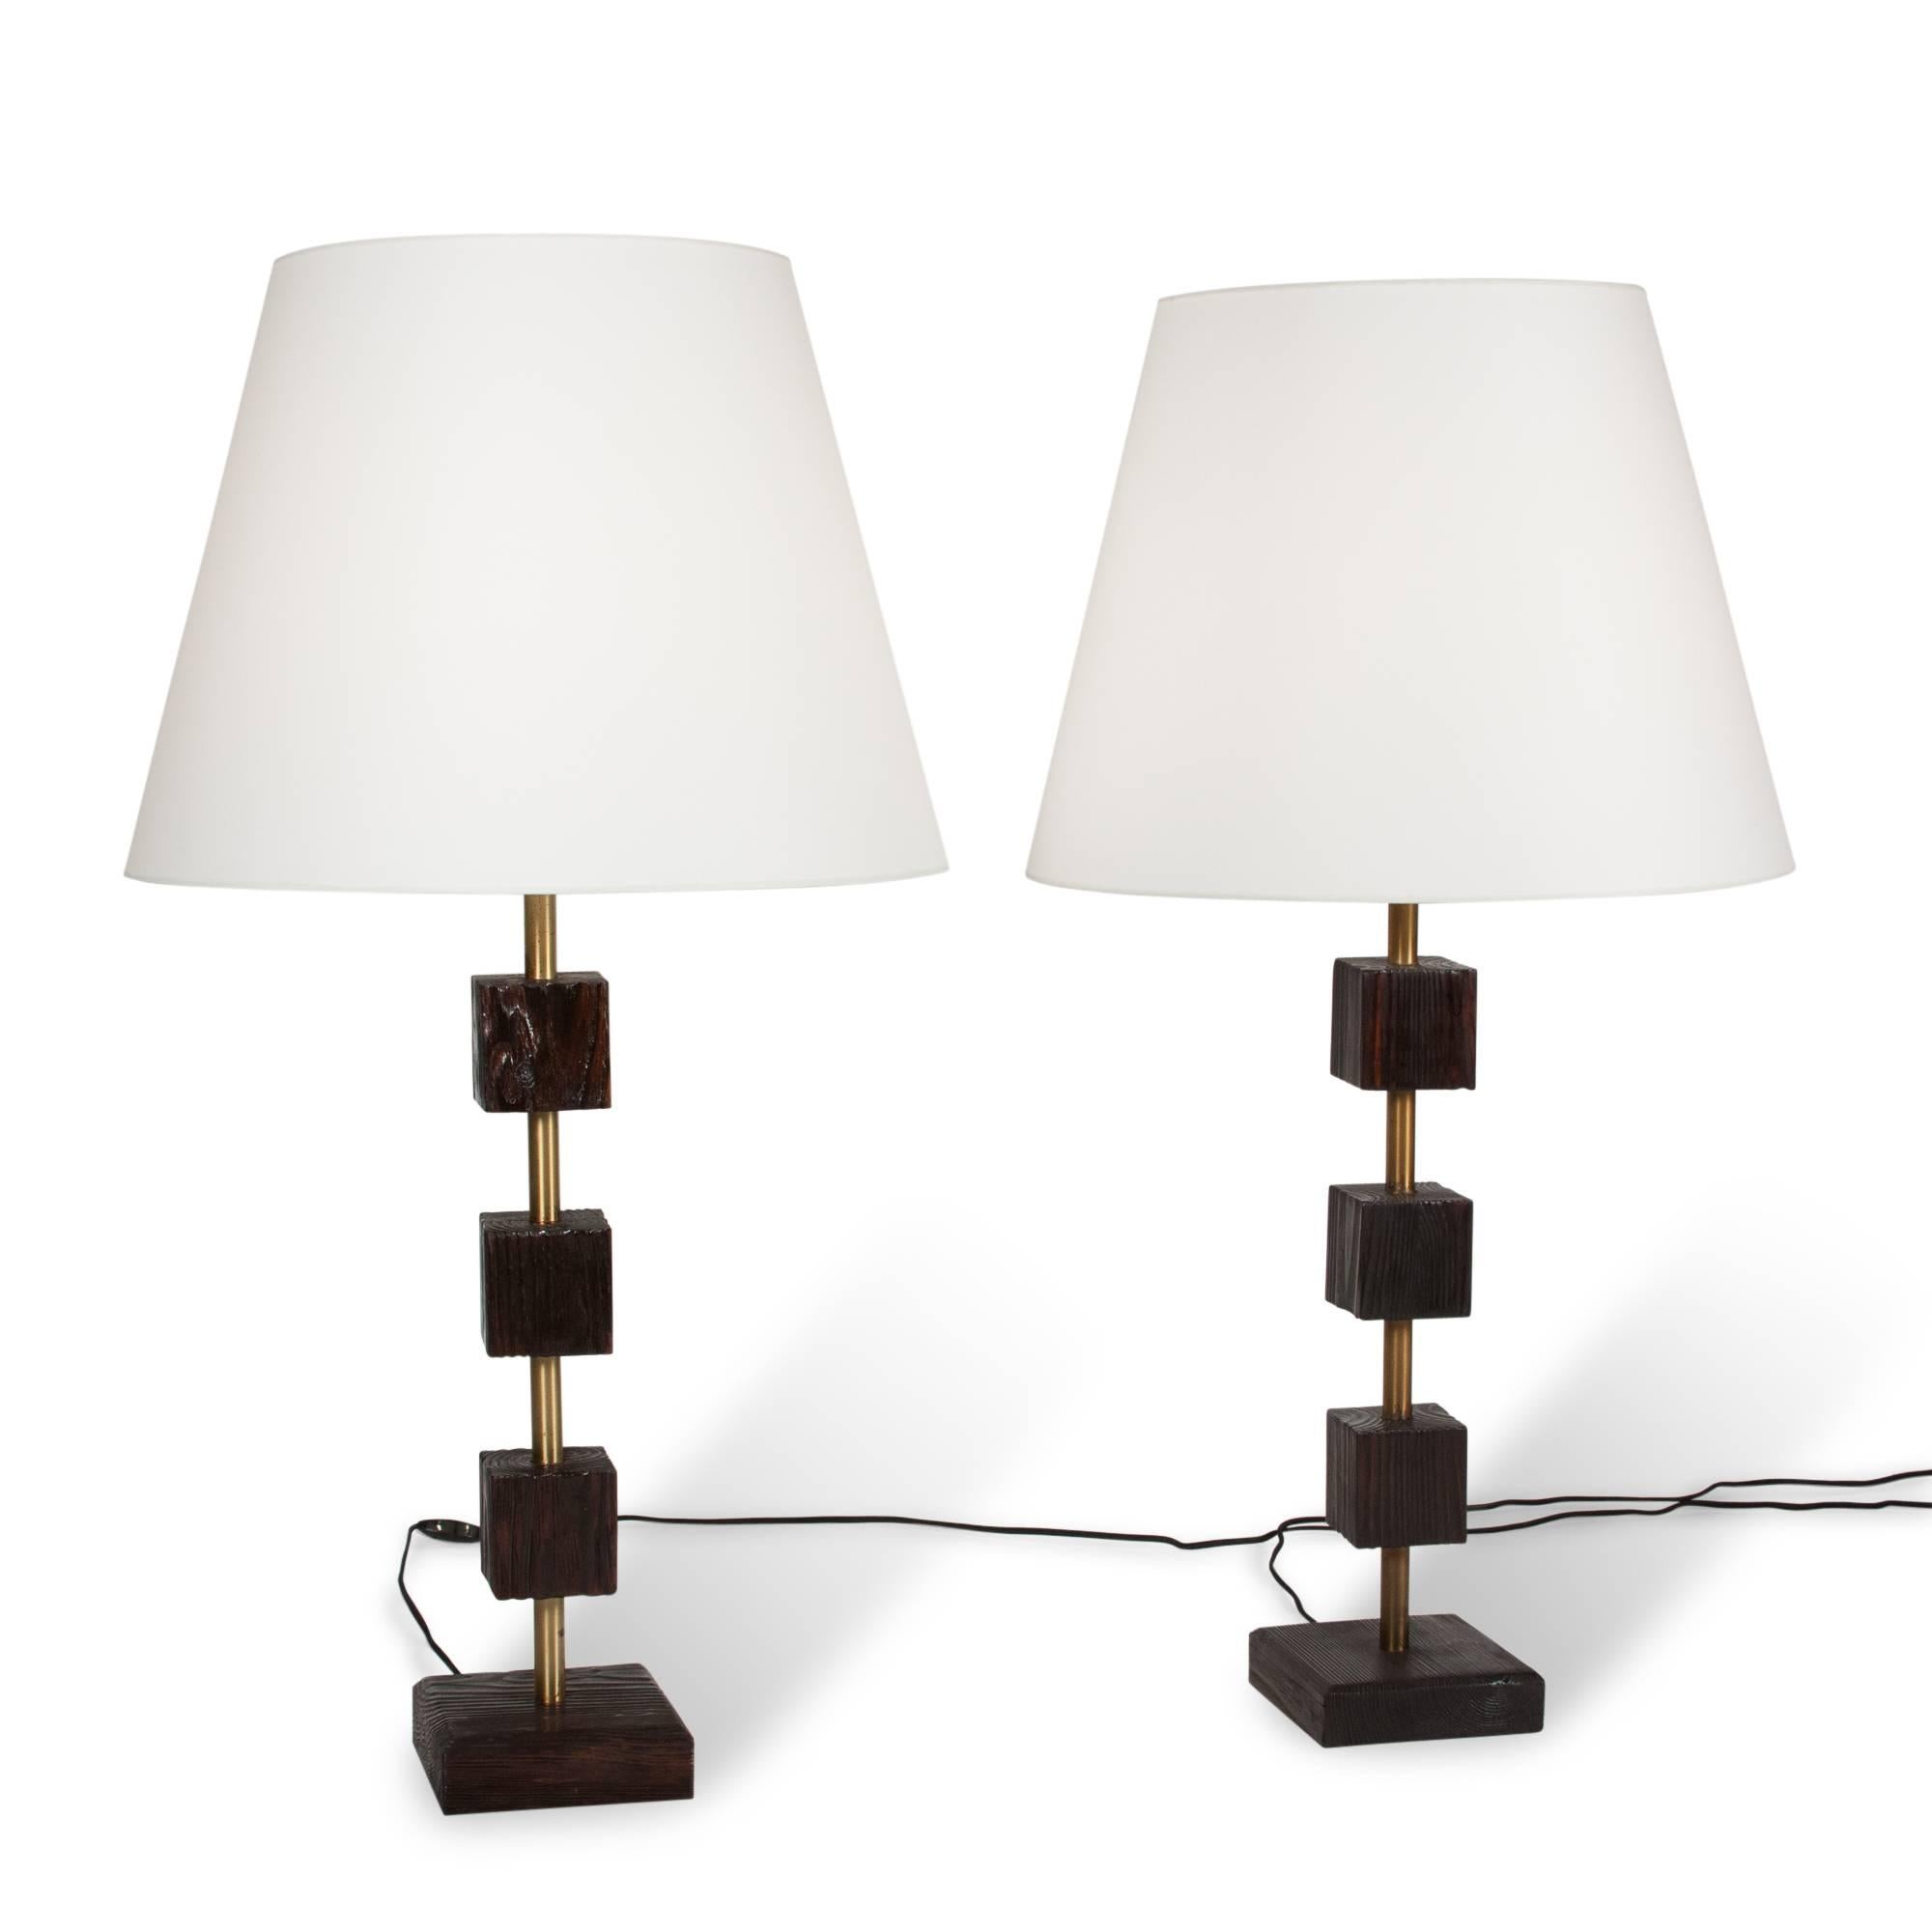 Pair of table lamps in ebonized pine and brass, pine cubes stacked and spaced along length of the brass rod, American, 1950s. In custom shades. Measures: 6 in.sq. base, 36 in. H, 19 ¼ in. D shade at widest.